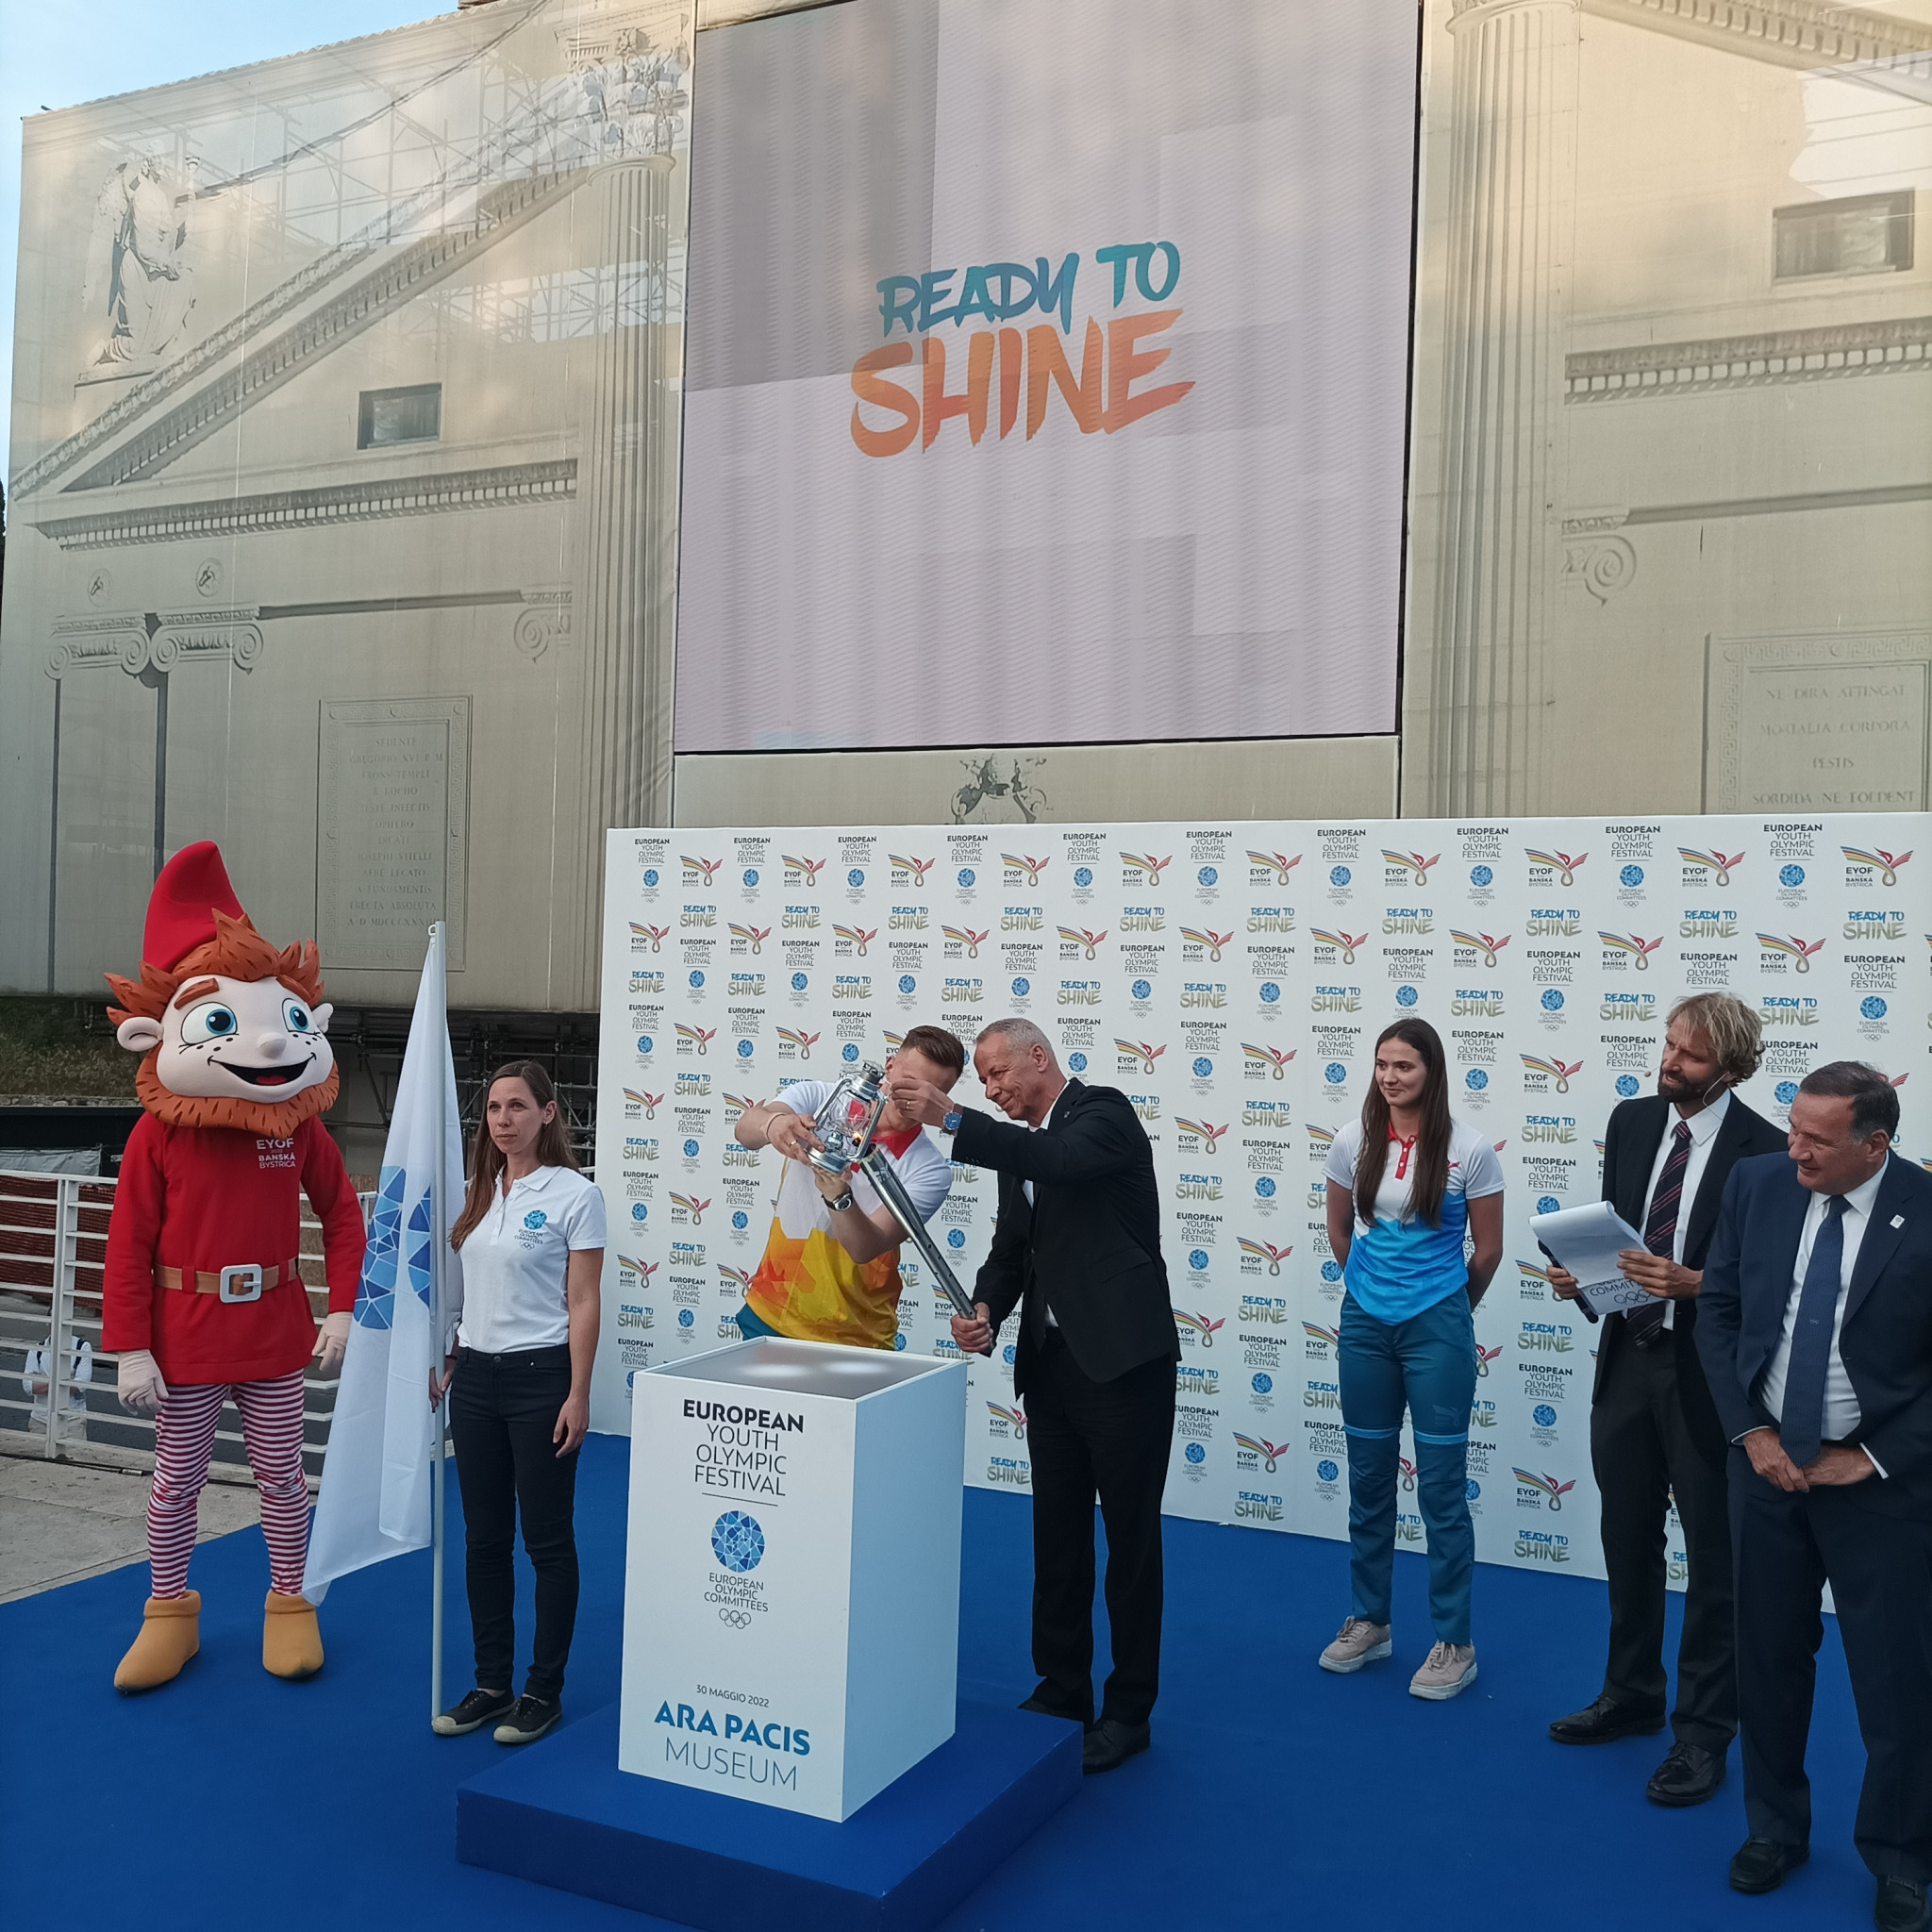 The 2022 European Youth Olympic Festival Flame is transferred to a safety lamp ©ITG